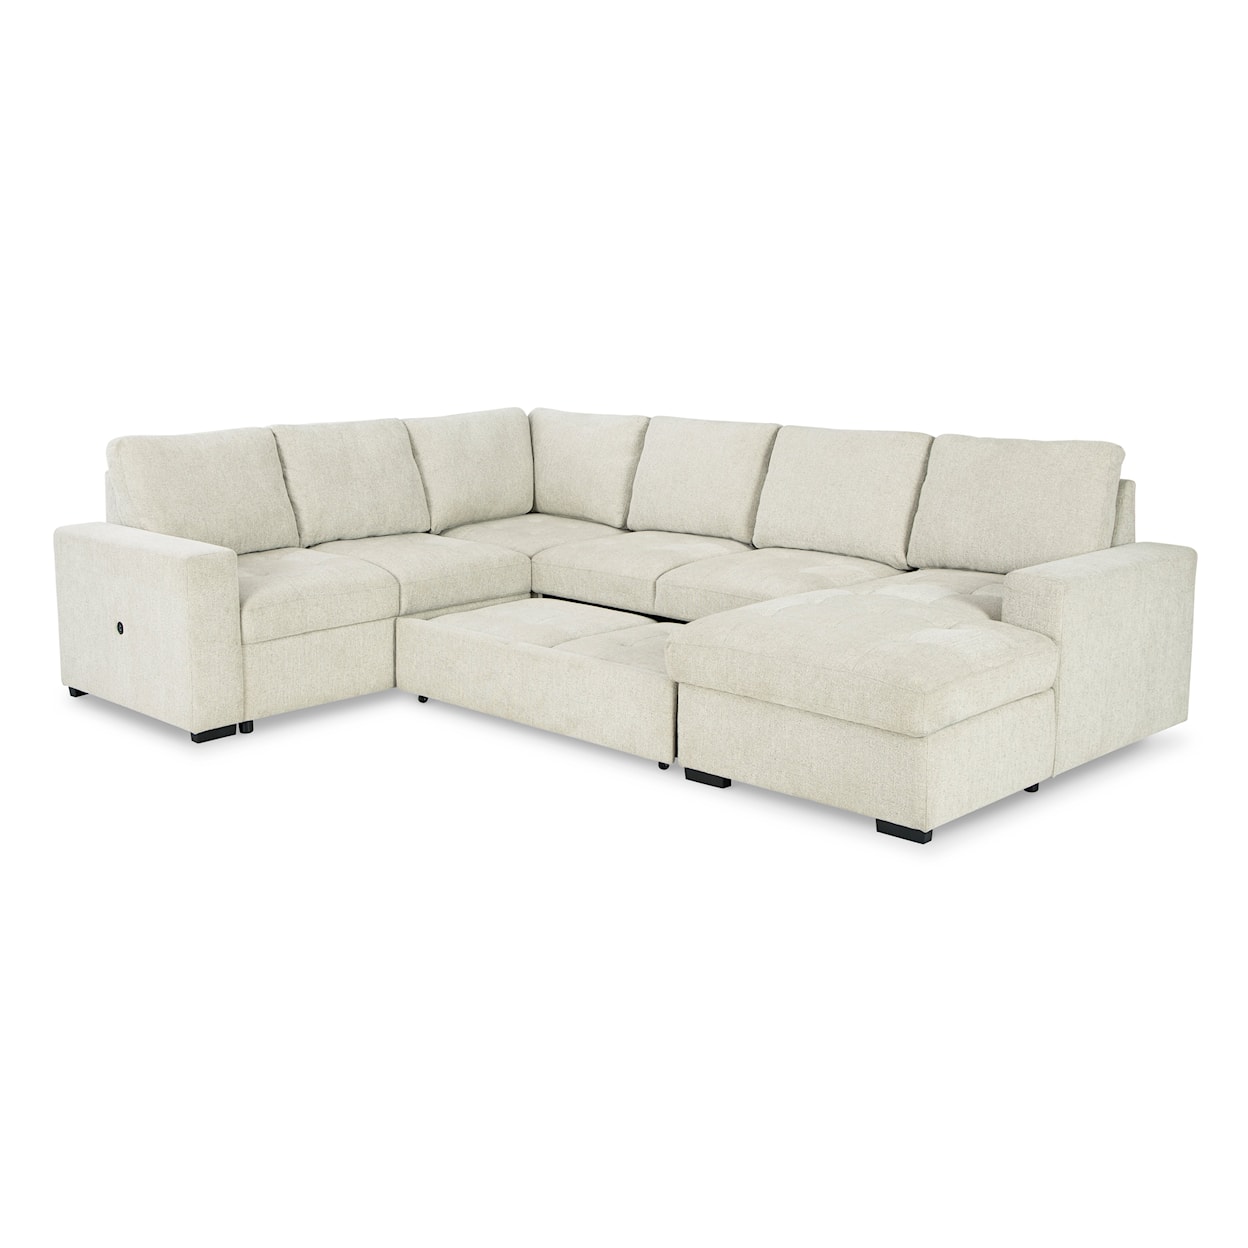 Signature Design by Ashley Millcoe 3-Piece Sectional with Pop Up Bed